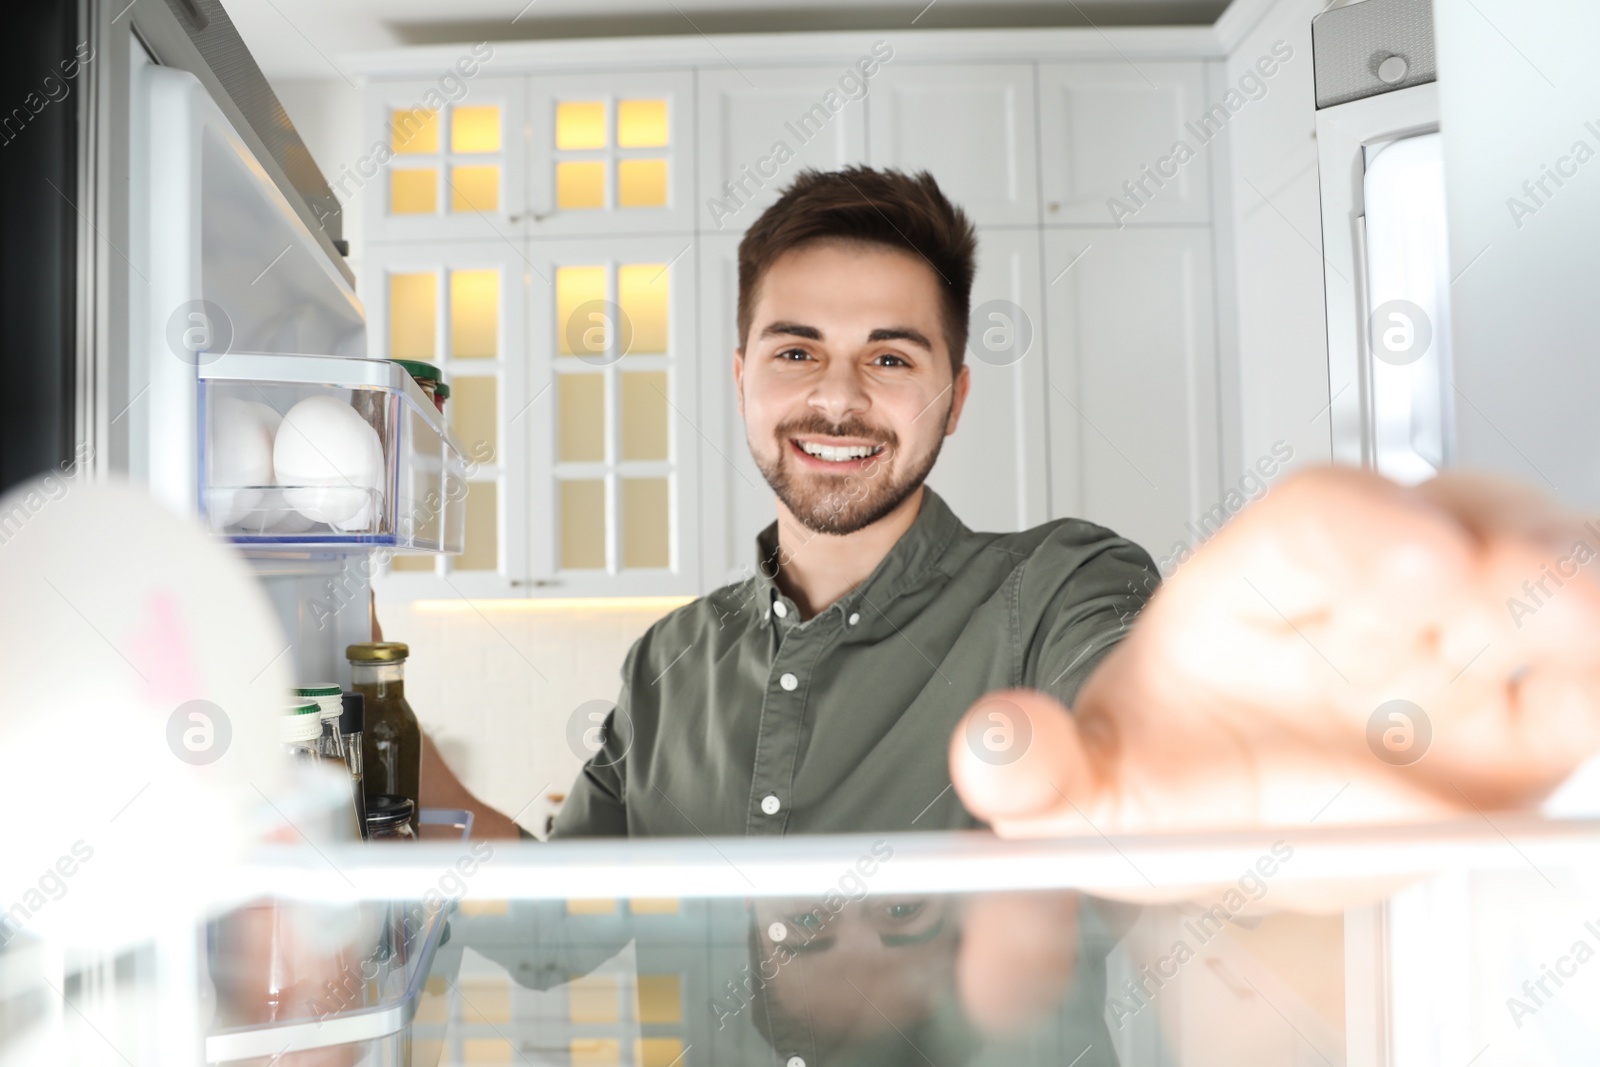 Photo of Young man looking into refrigerator, view from inside